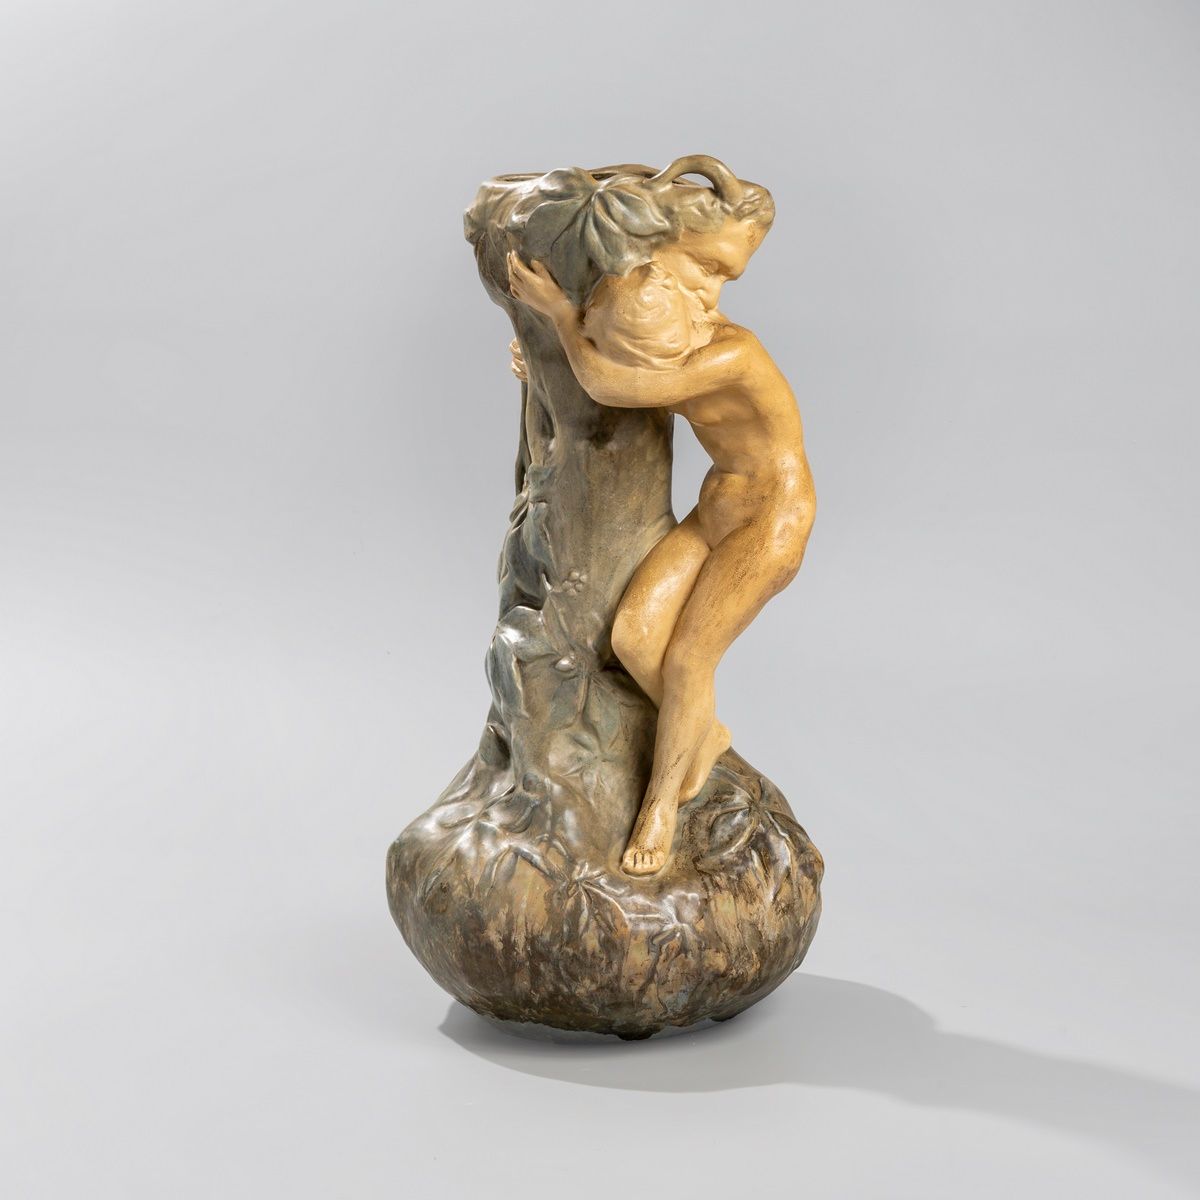 Null Ernest BUSSIERE (1863-1913)

Vase with a nymph

Glazed stoneware

Signed an&hellip;